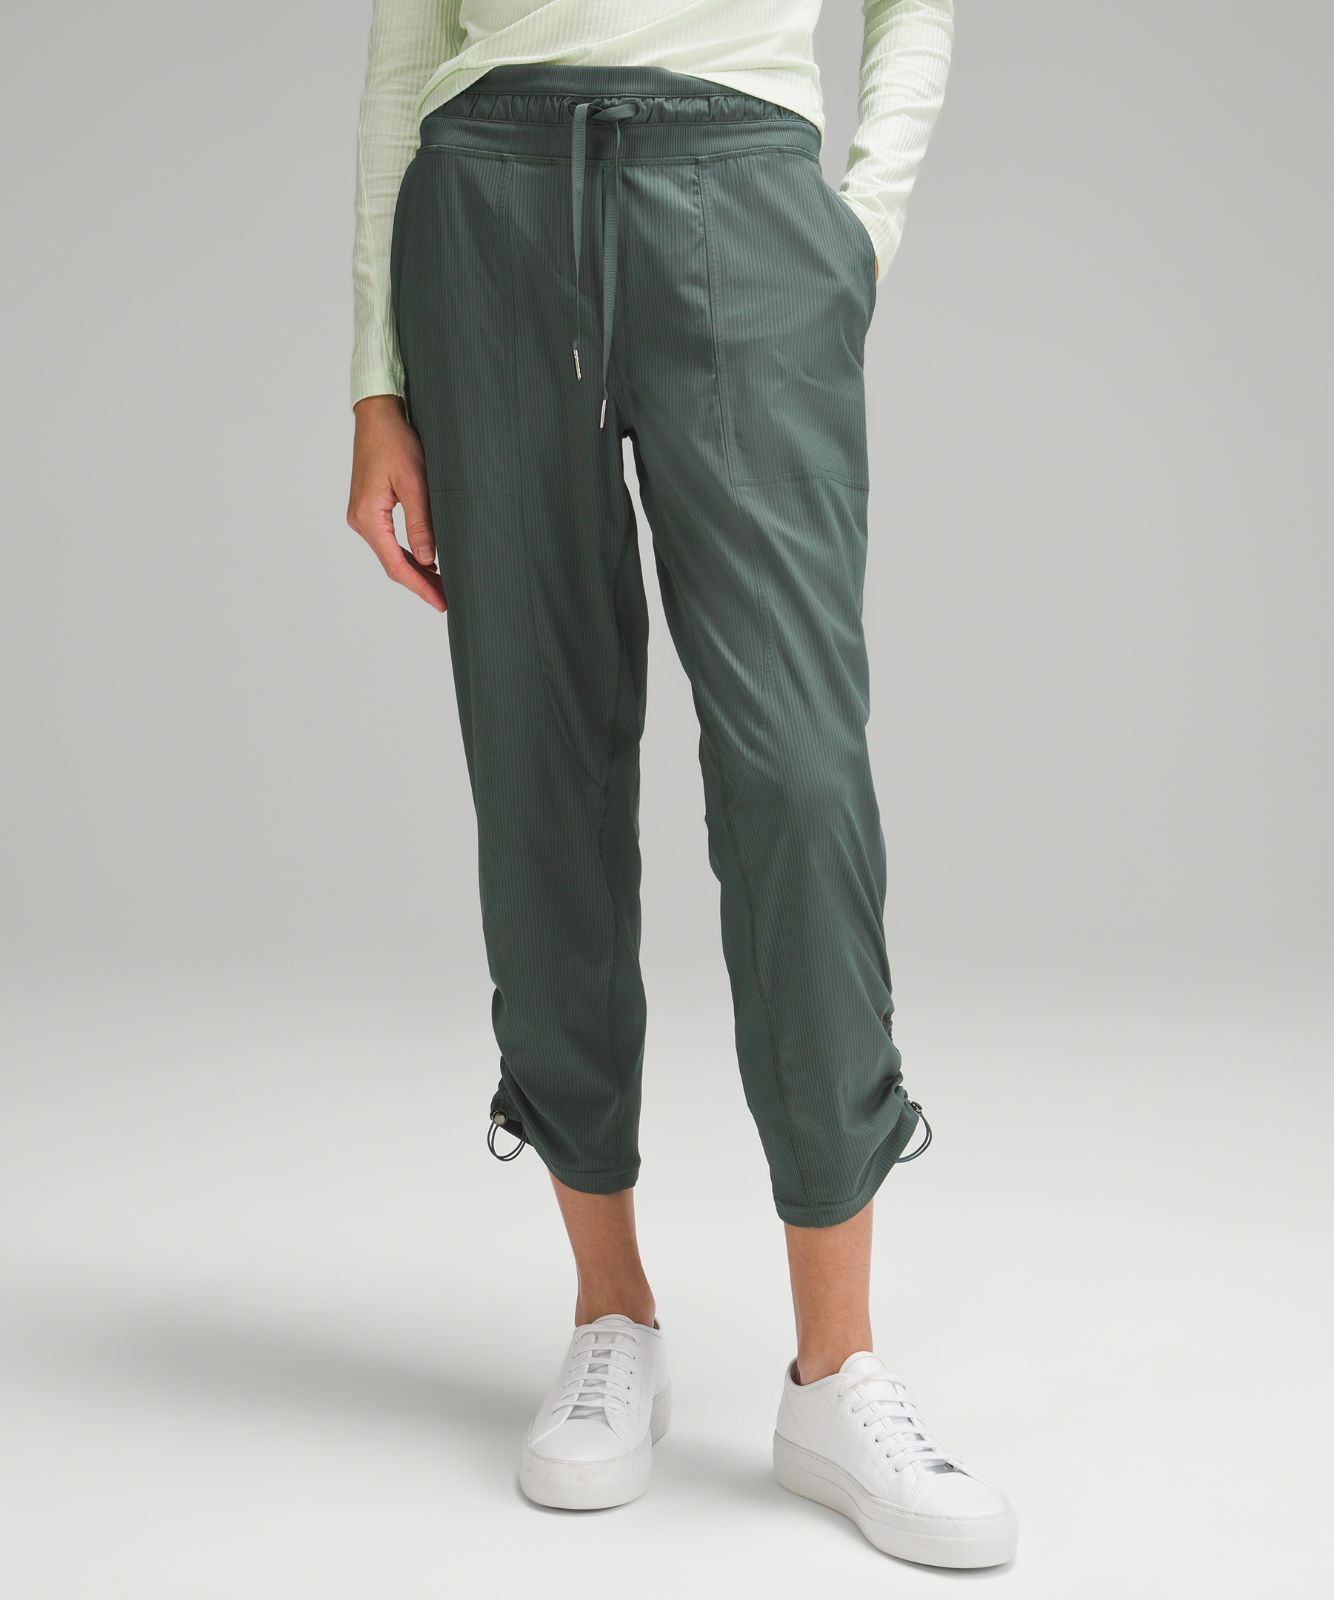 Dance Studio Mid-Rise Cropped Pant, Joggers